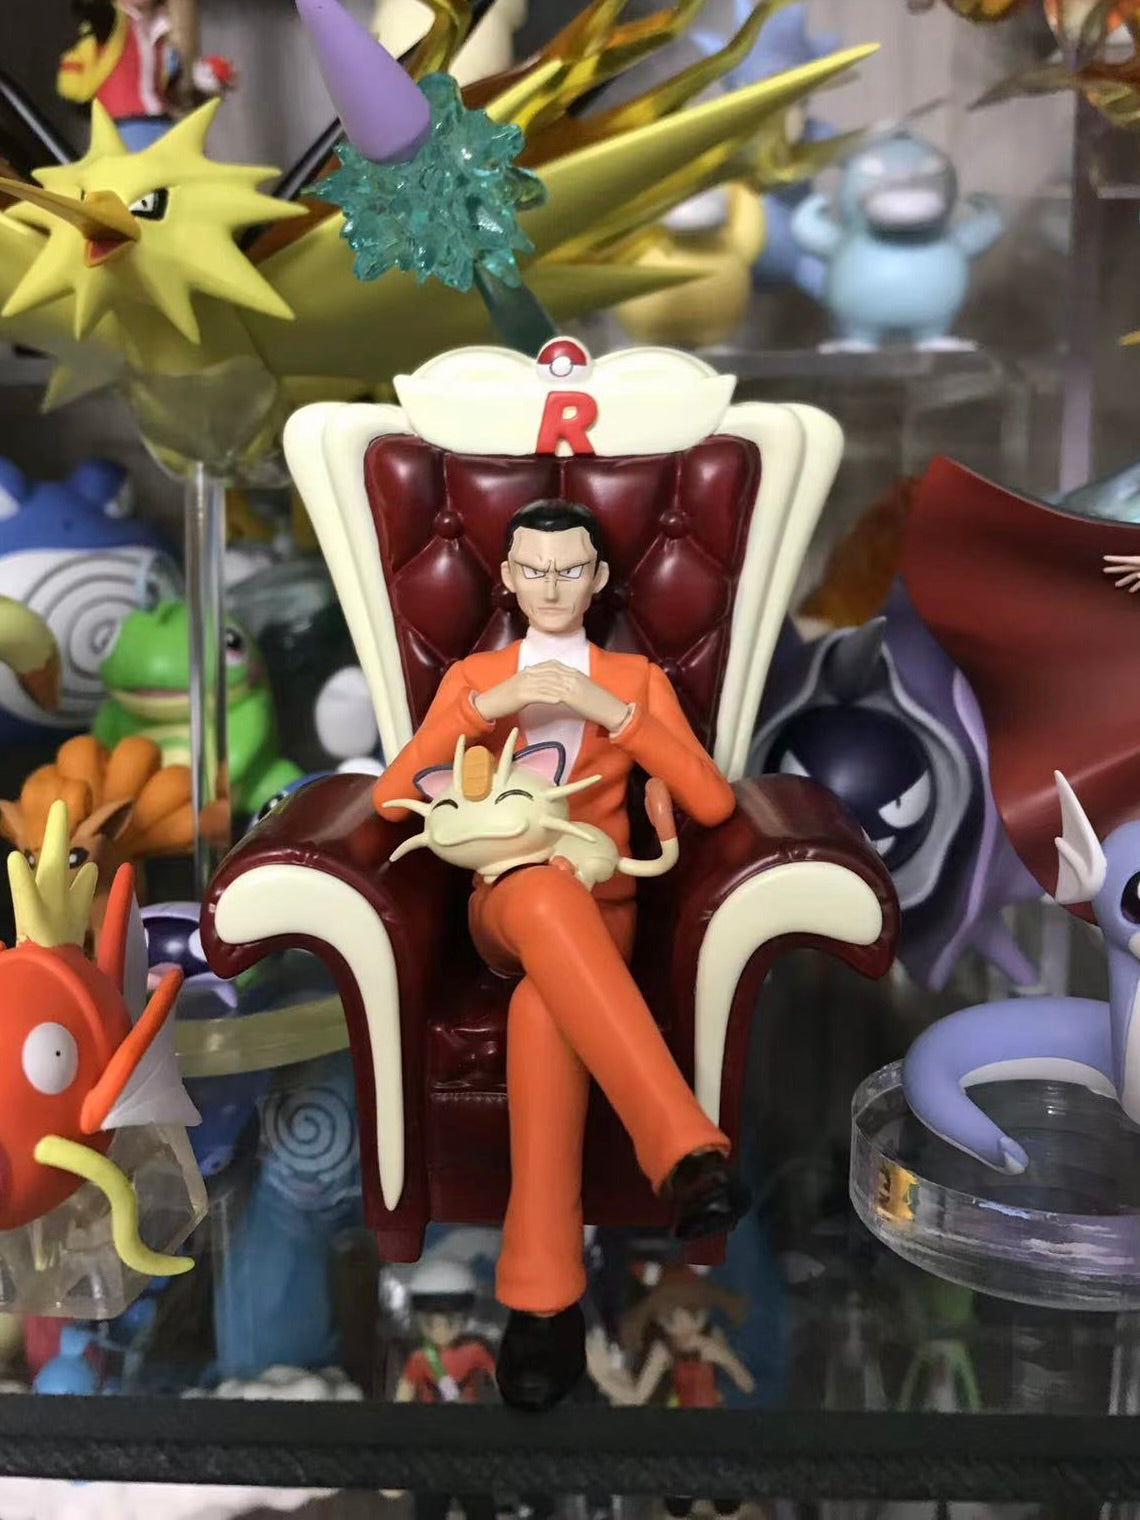 [IN STOCK] 1/20 Scale World Figure [KING] - Giovanni & Meowth